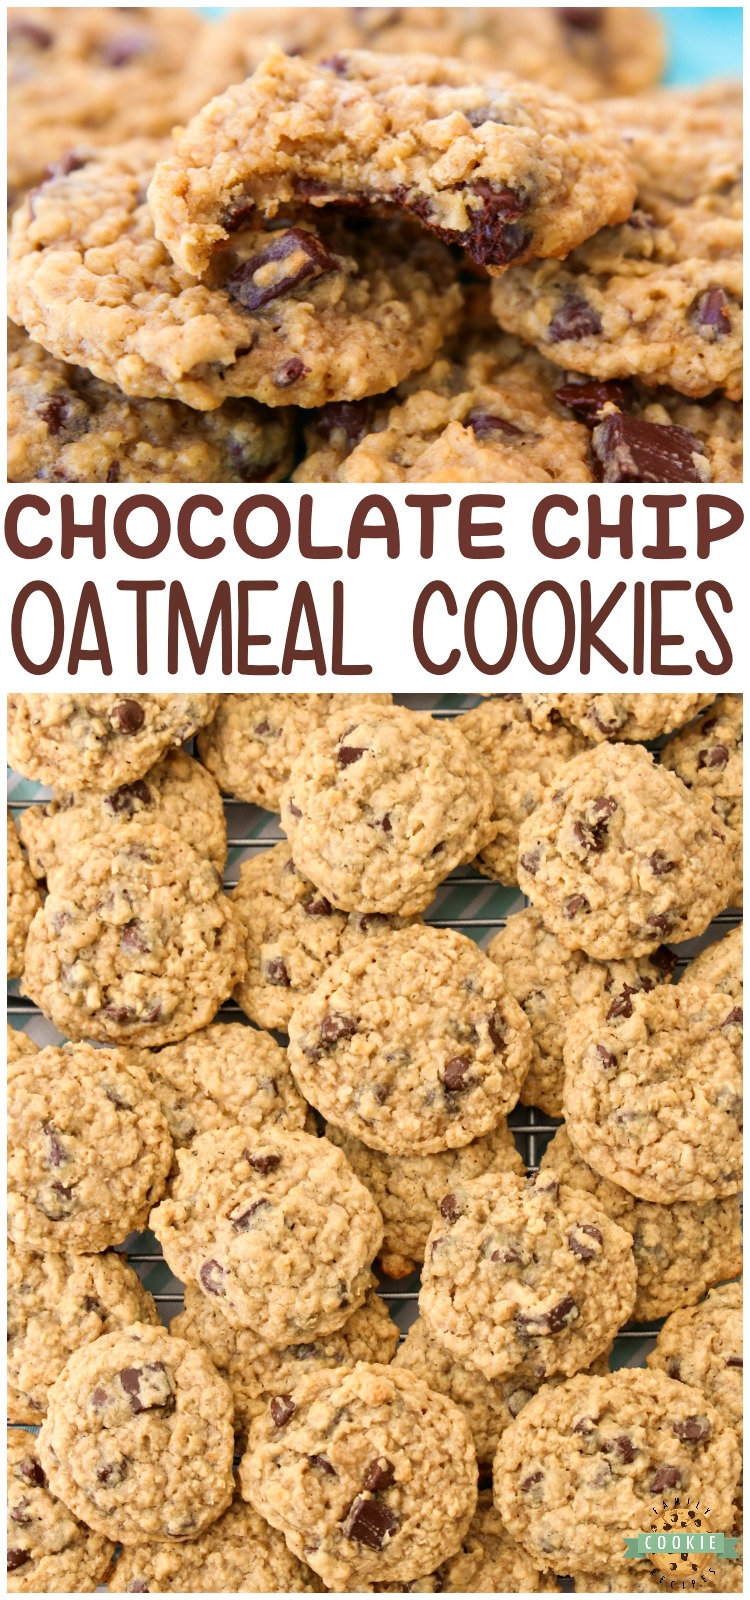 Chocolate Chip Oatmeal Cookies made with classic ingredients for the perfect soft & chewy oatmeal cookie! Amazing homemade cookie recipe you have to try! #cookies #oatmeal #chocolatechip #baking #dessert #recipe from FAMILY COOKIE RECIPES